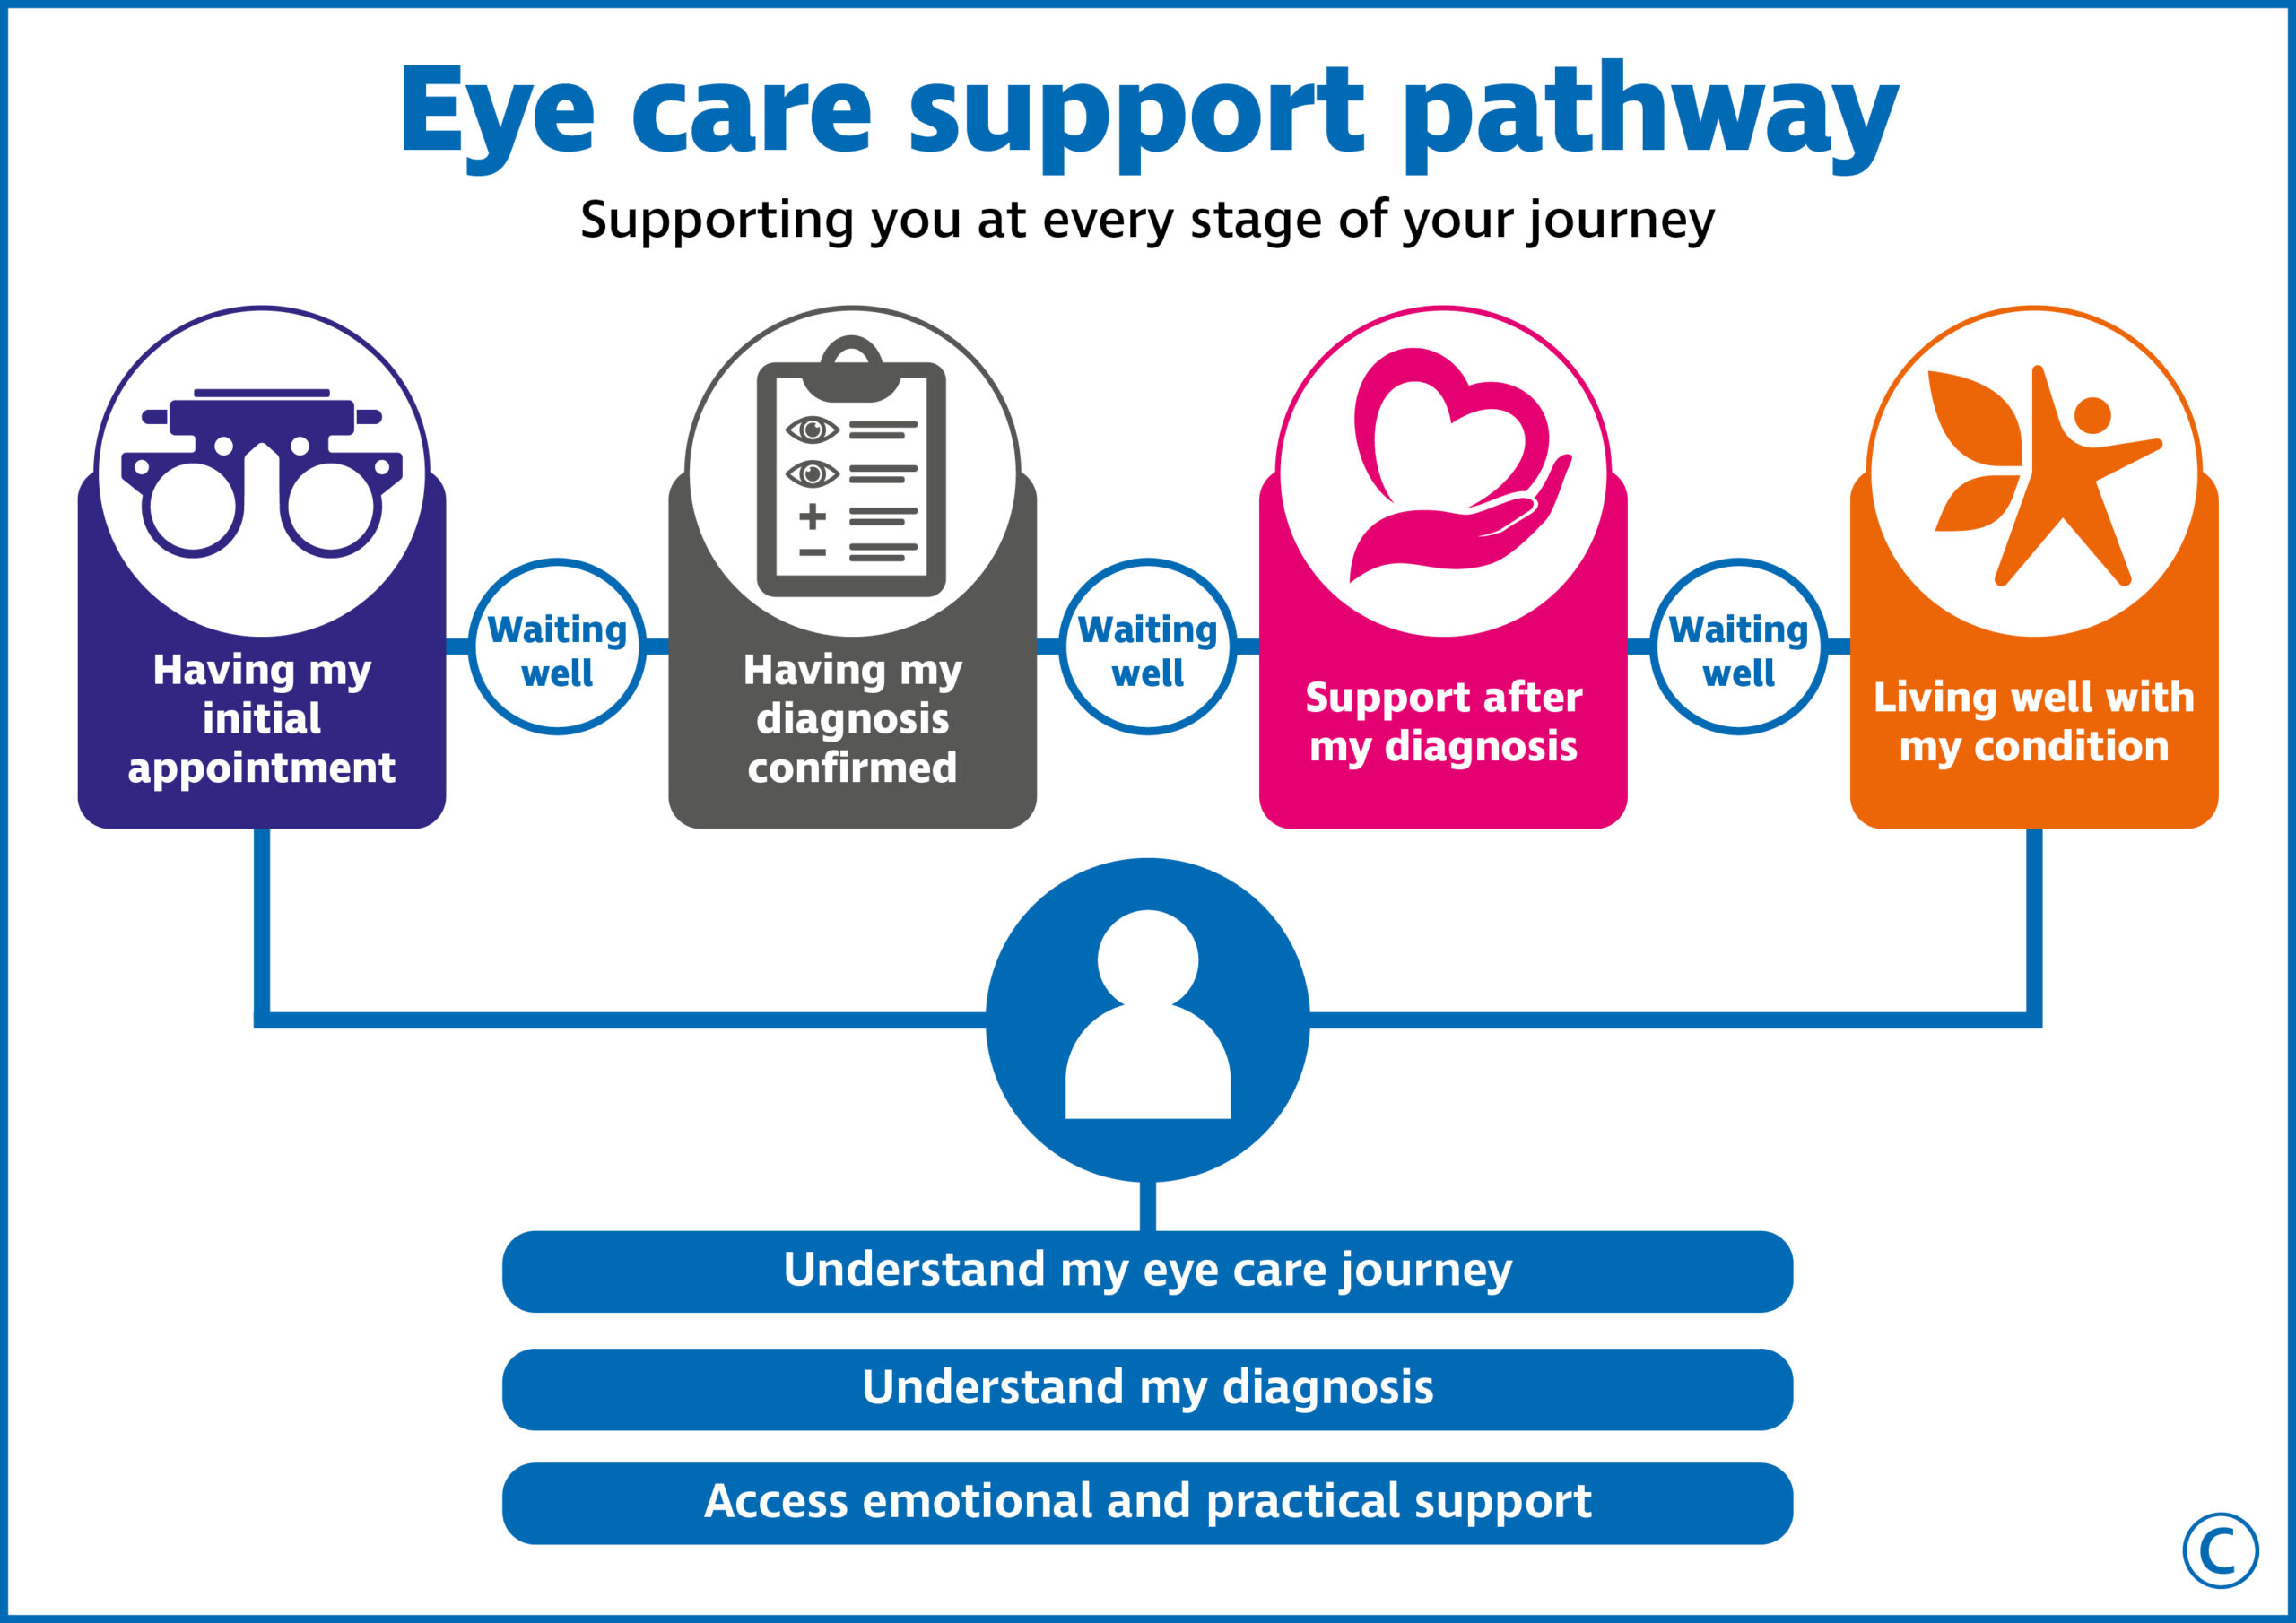 Eye care support pathway Supporting you at every stage of your journey Underneath a graphic shows the four stages of an individual’s journey with the following text: 1. Having my initial appointment 2. Waiting well 3. Having my diagnosis confirmed 4. Waiting well 5. Support after my diagnosis 6. Waiting well 7. Living well with my condition Underneath this graphic it outlines what an individual can expect on their journey. Understand my eye care journey Understand my diagnosis Access emotional and practical support 